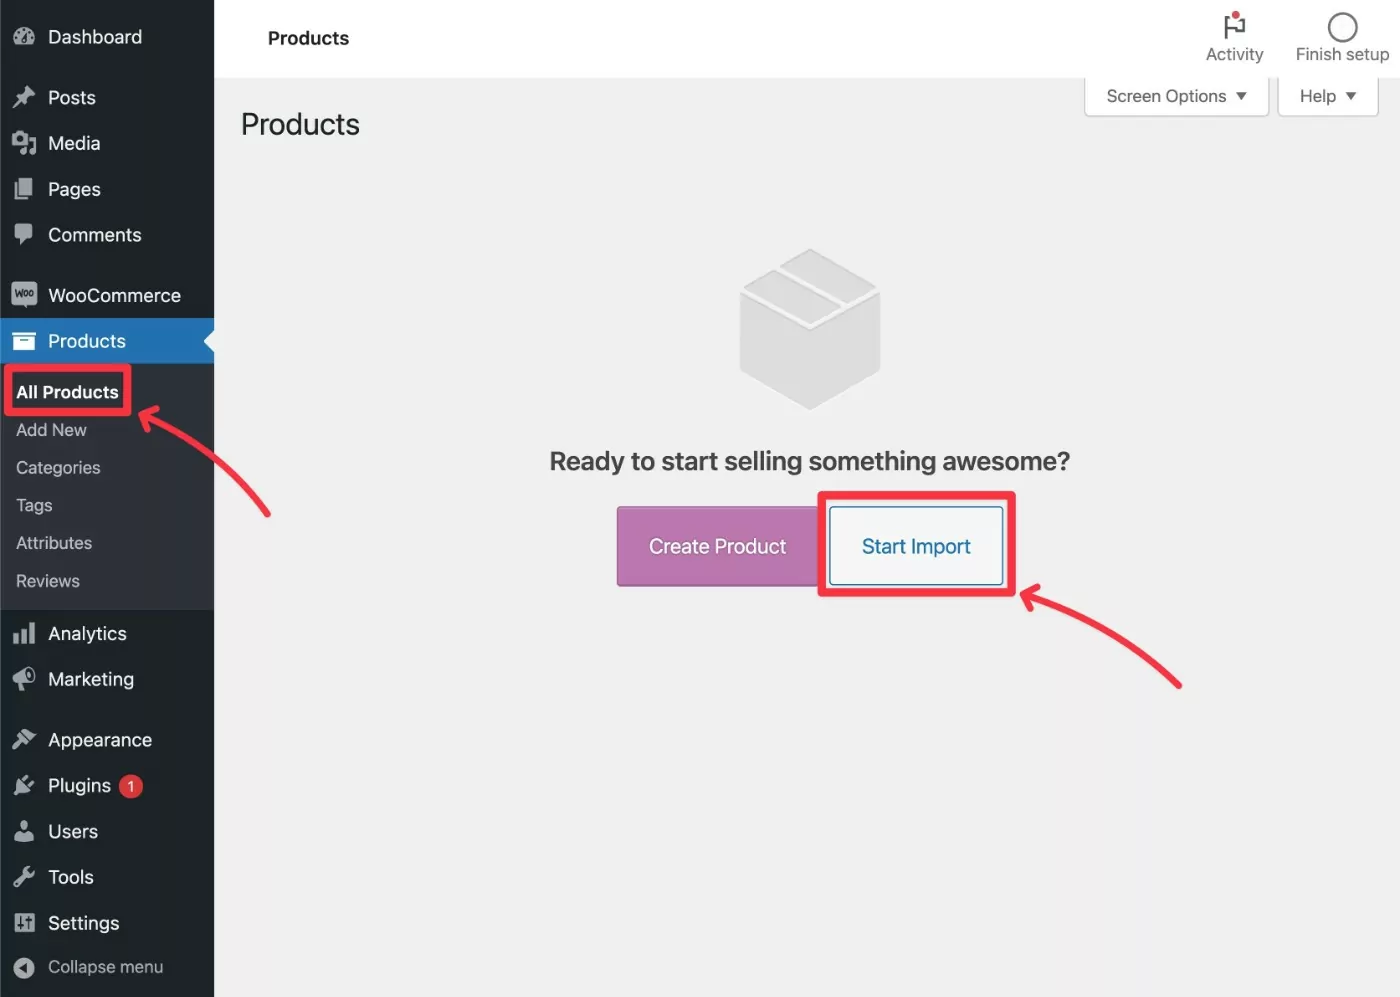 Launch the built-in WooCommerce tool to import products with images